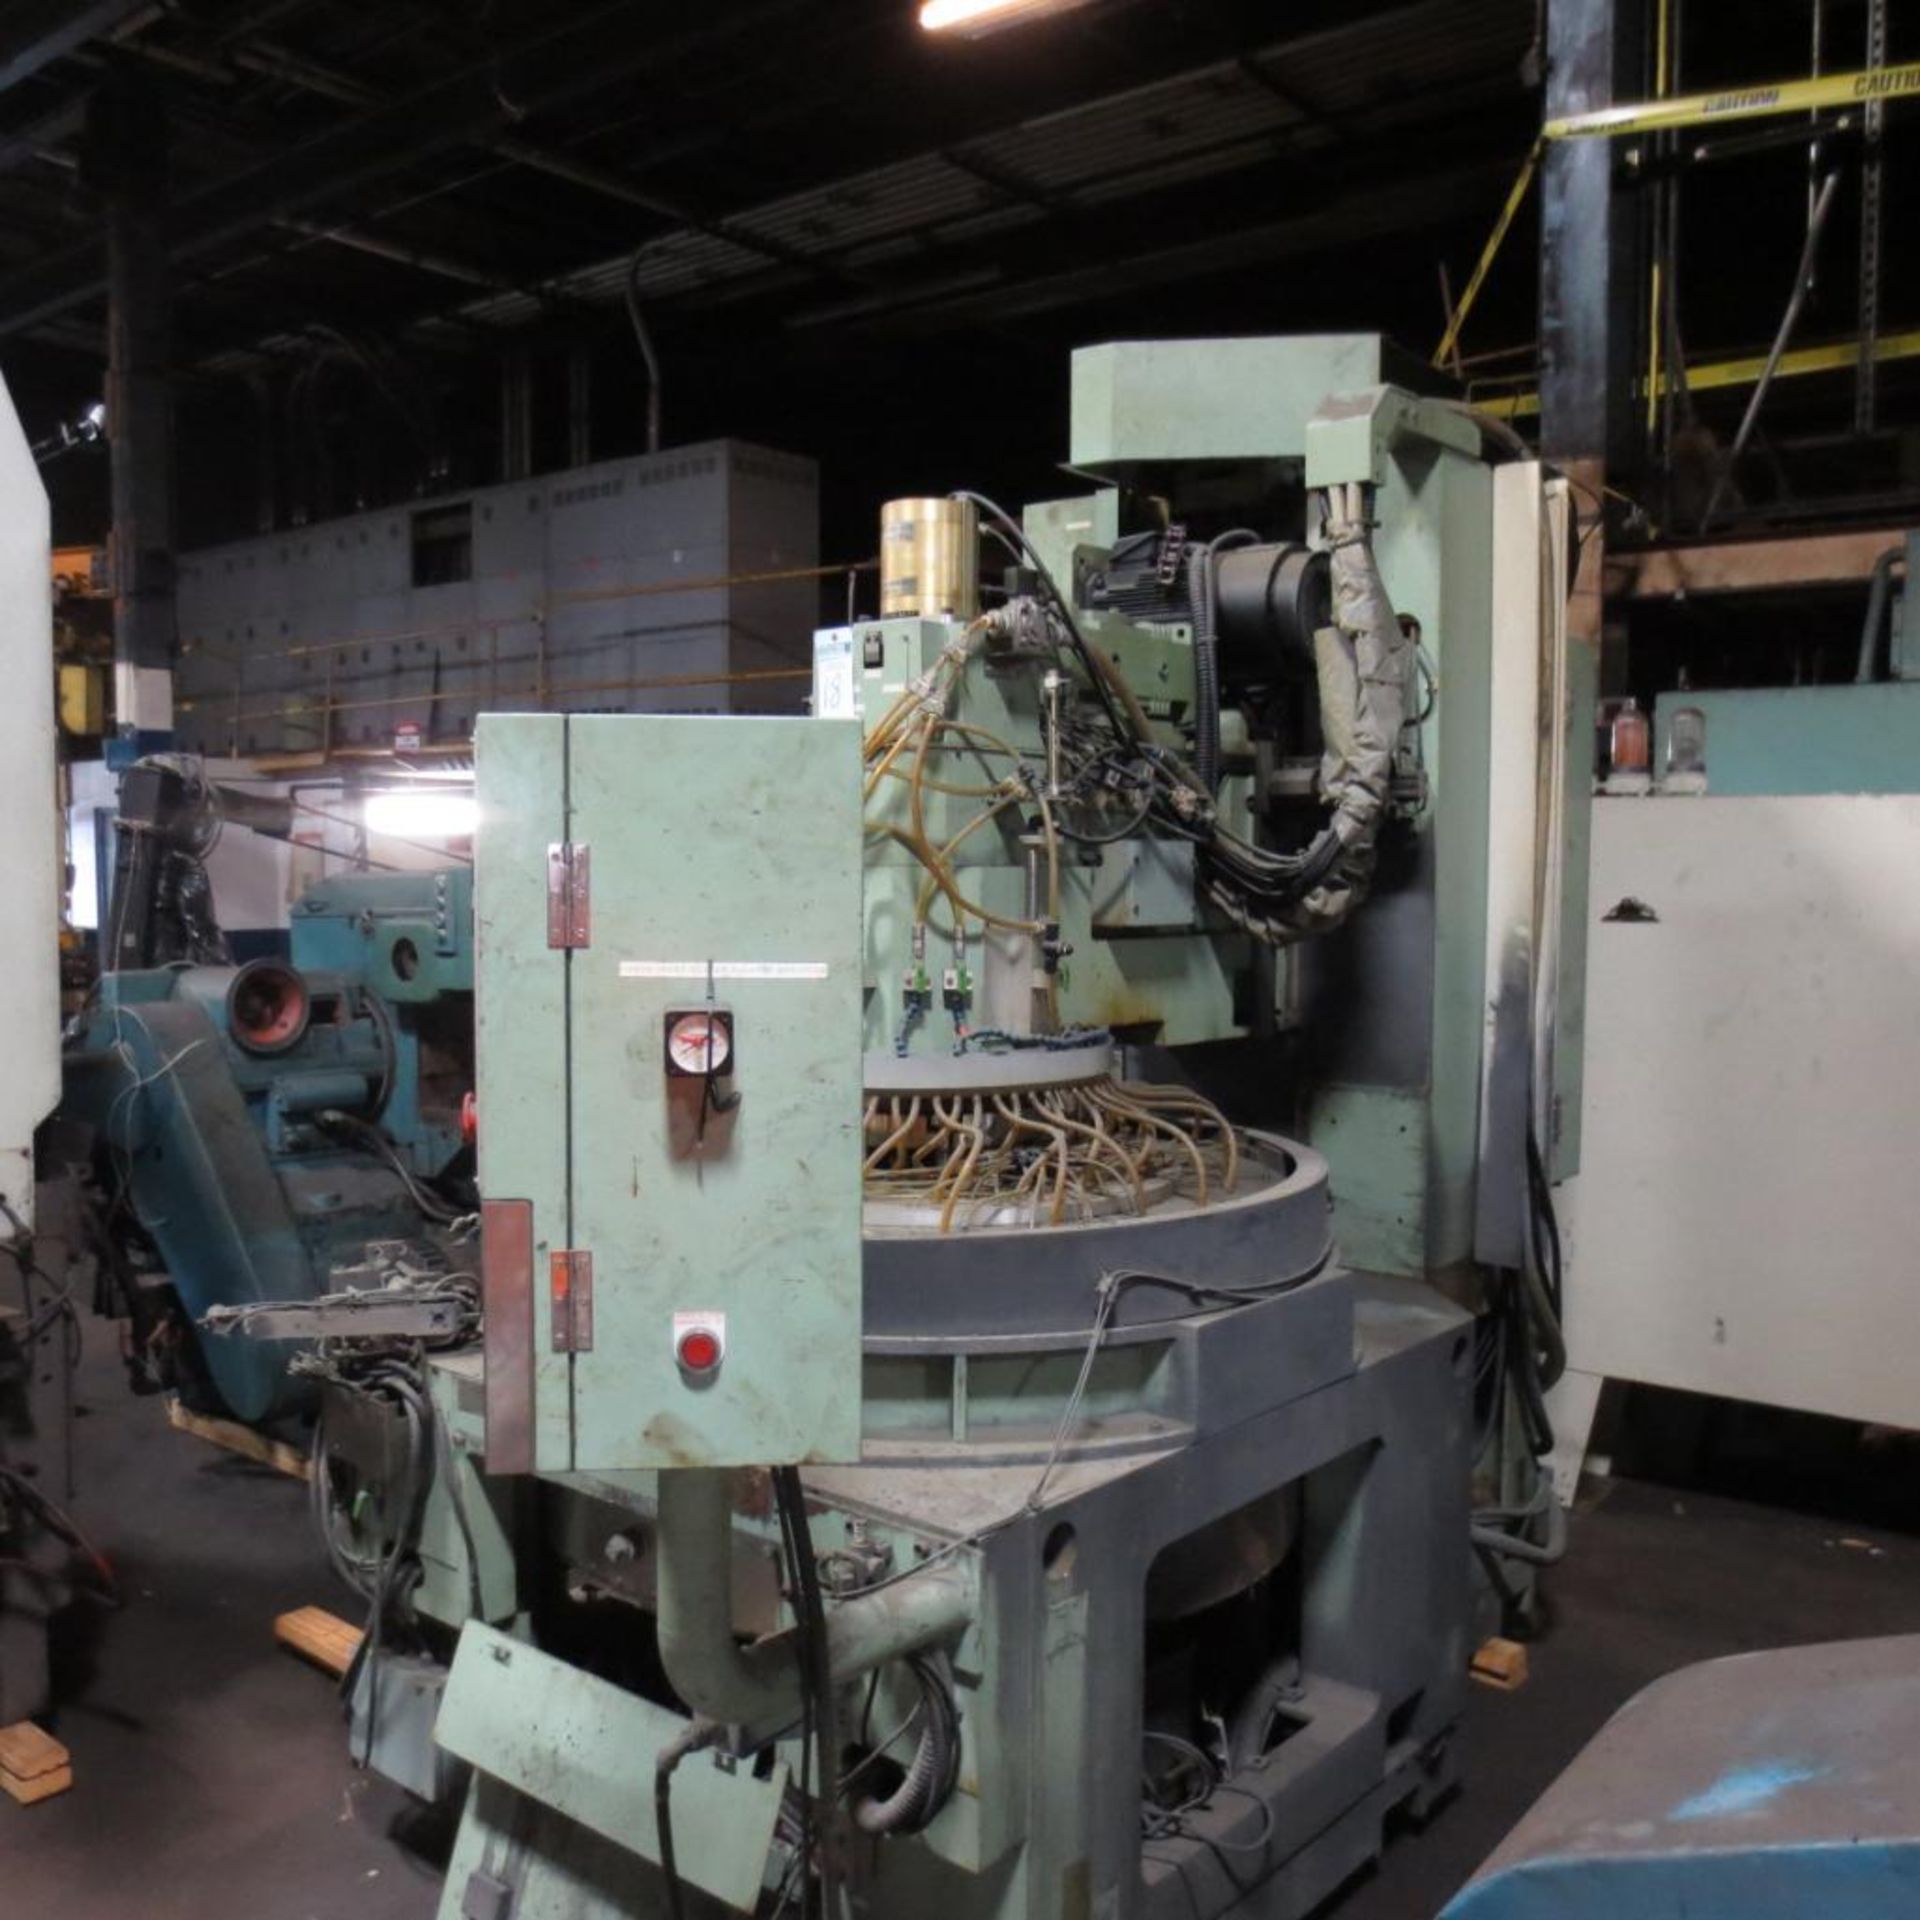 SSC System Seiko Vertical Lapping Machine S/N: 3745 (1996) CNC Control. Loading Fee is $850.00 - Image 8 of 8